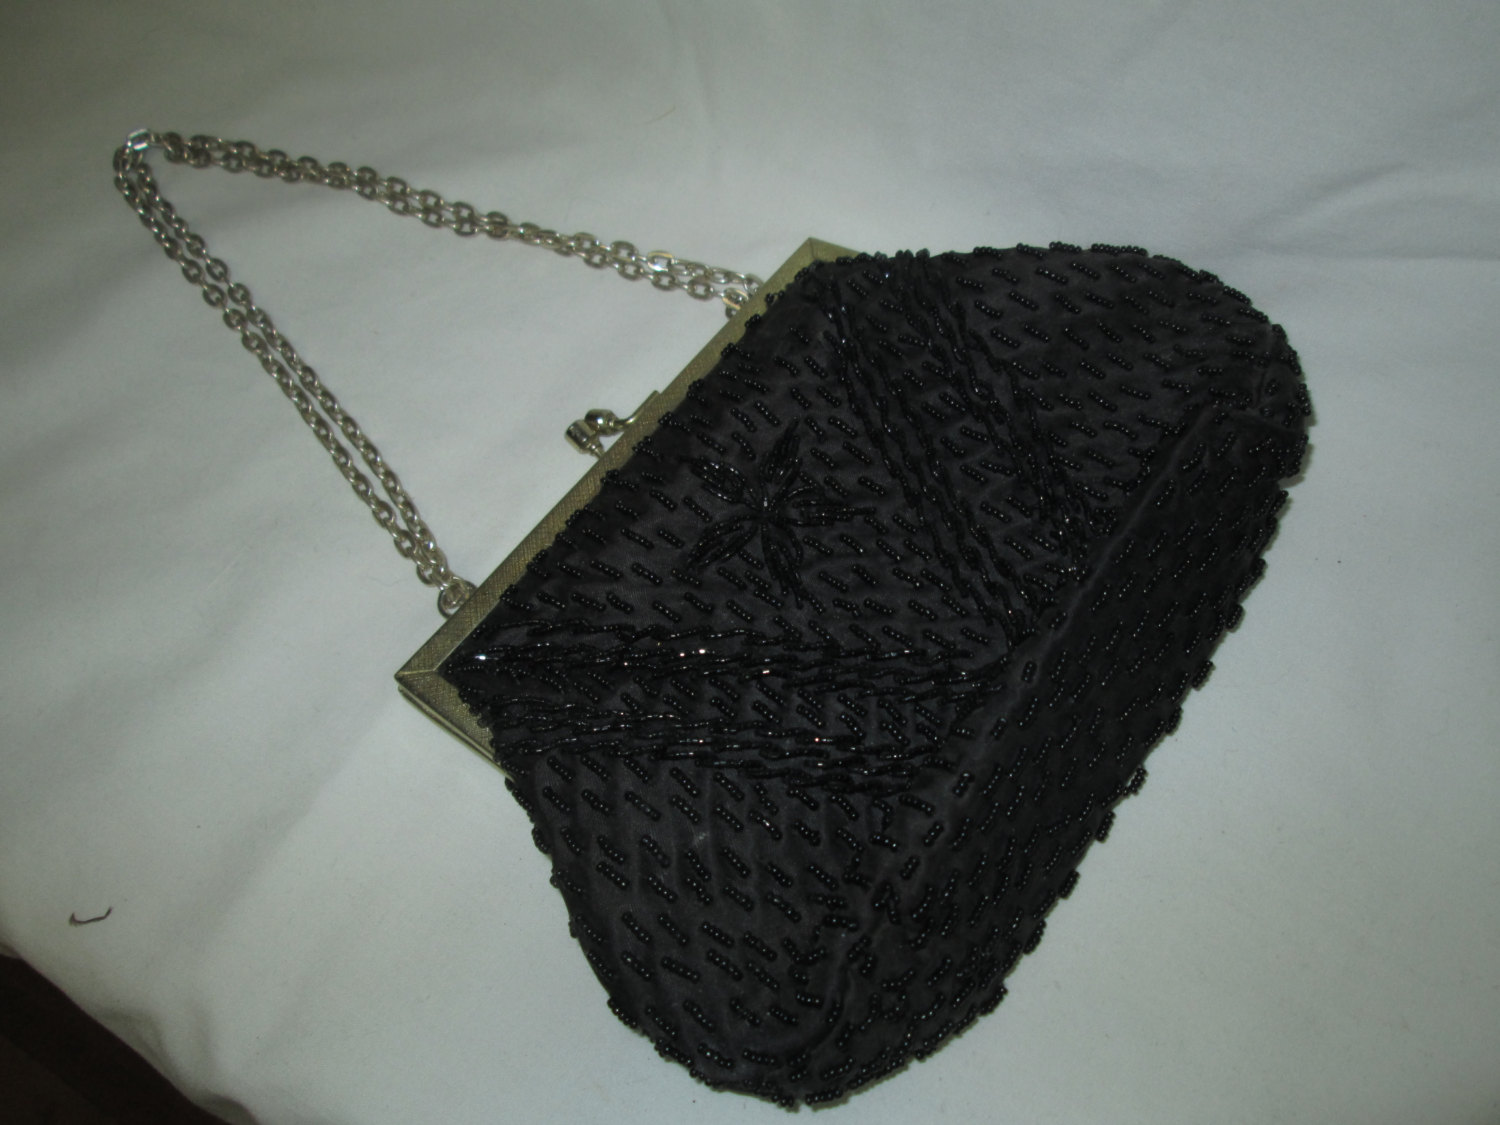 Vintage Black Beaded Evening Bag Clutch Purse With Chain strap: Hand-made